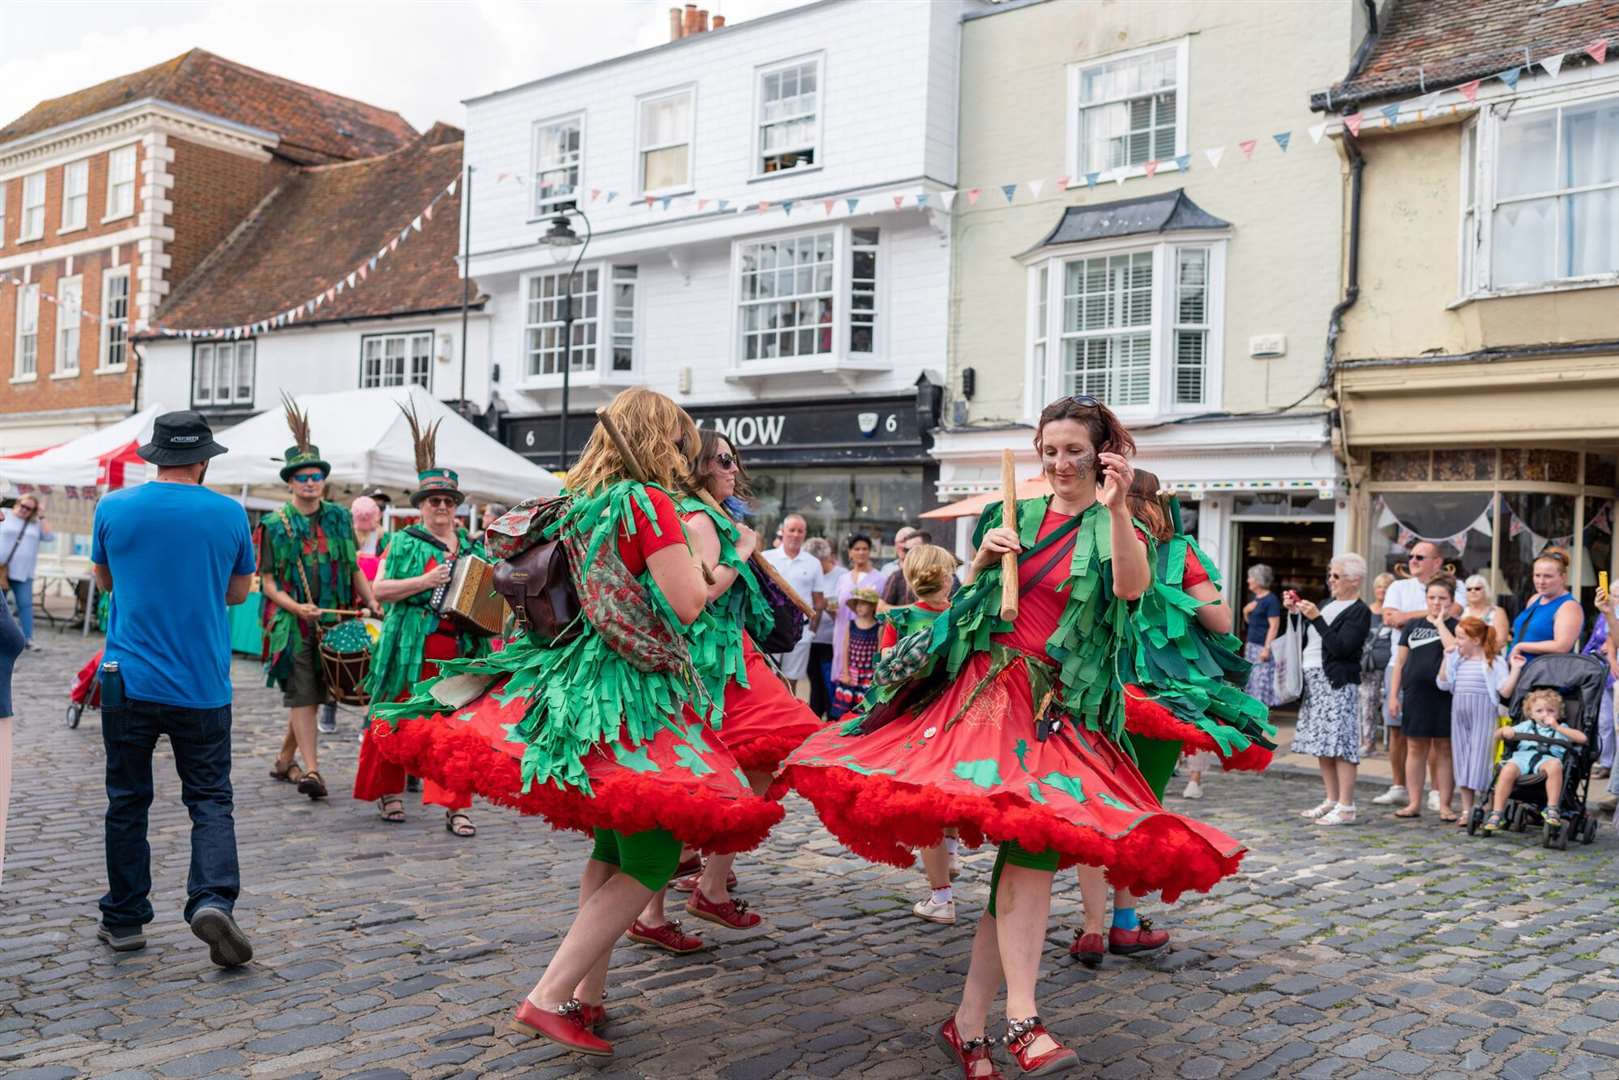 Revellers enjoying Faversham Hop Festival which sees thousands of visitors head to the town